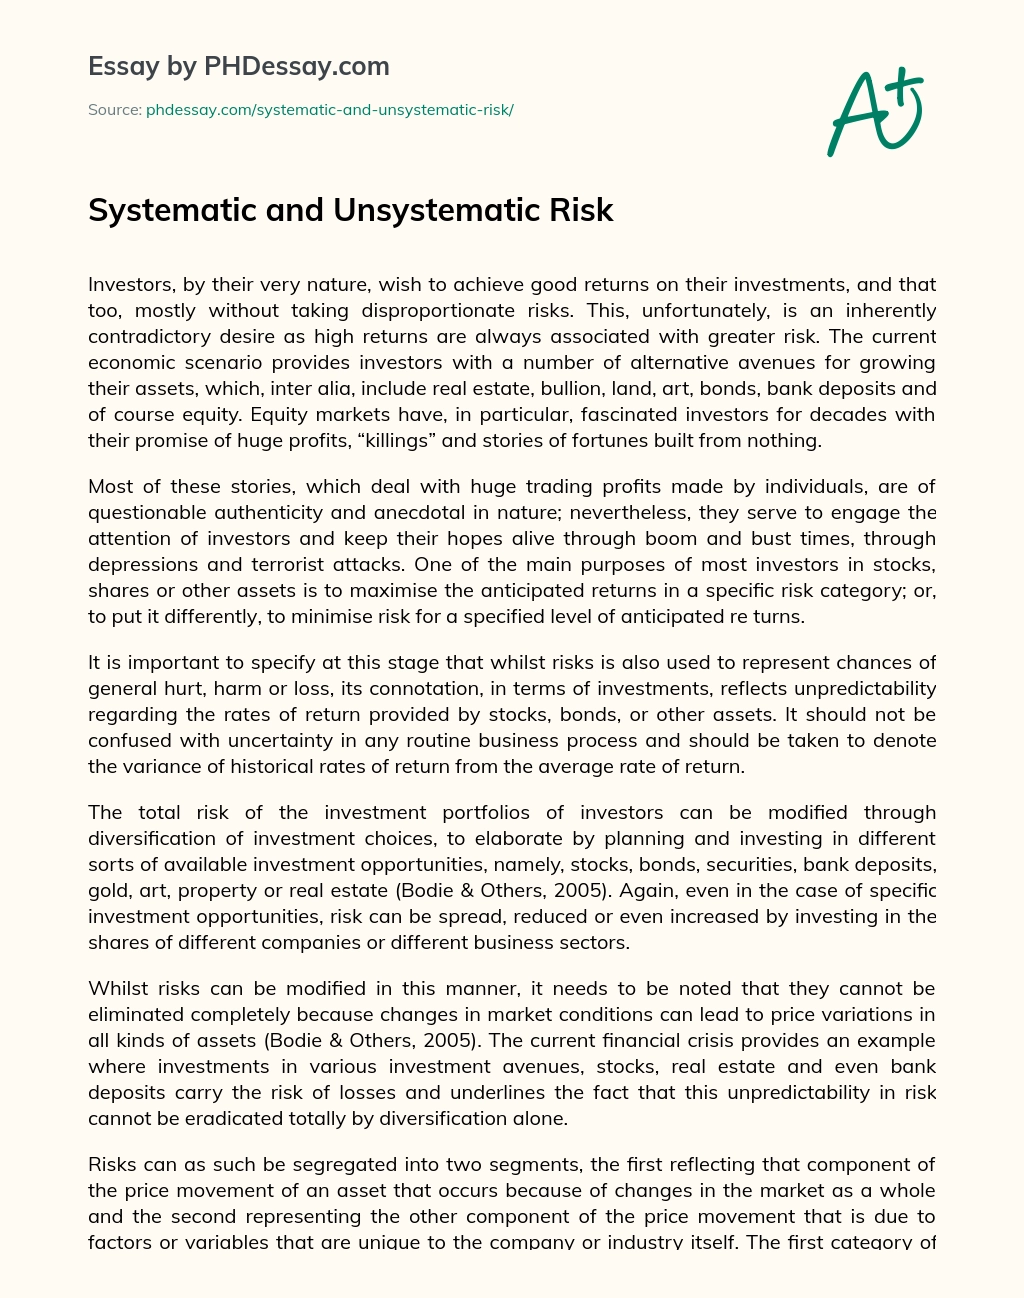 Systematic and Unsystematic Risk essay